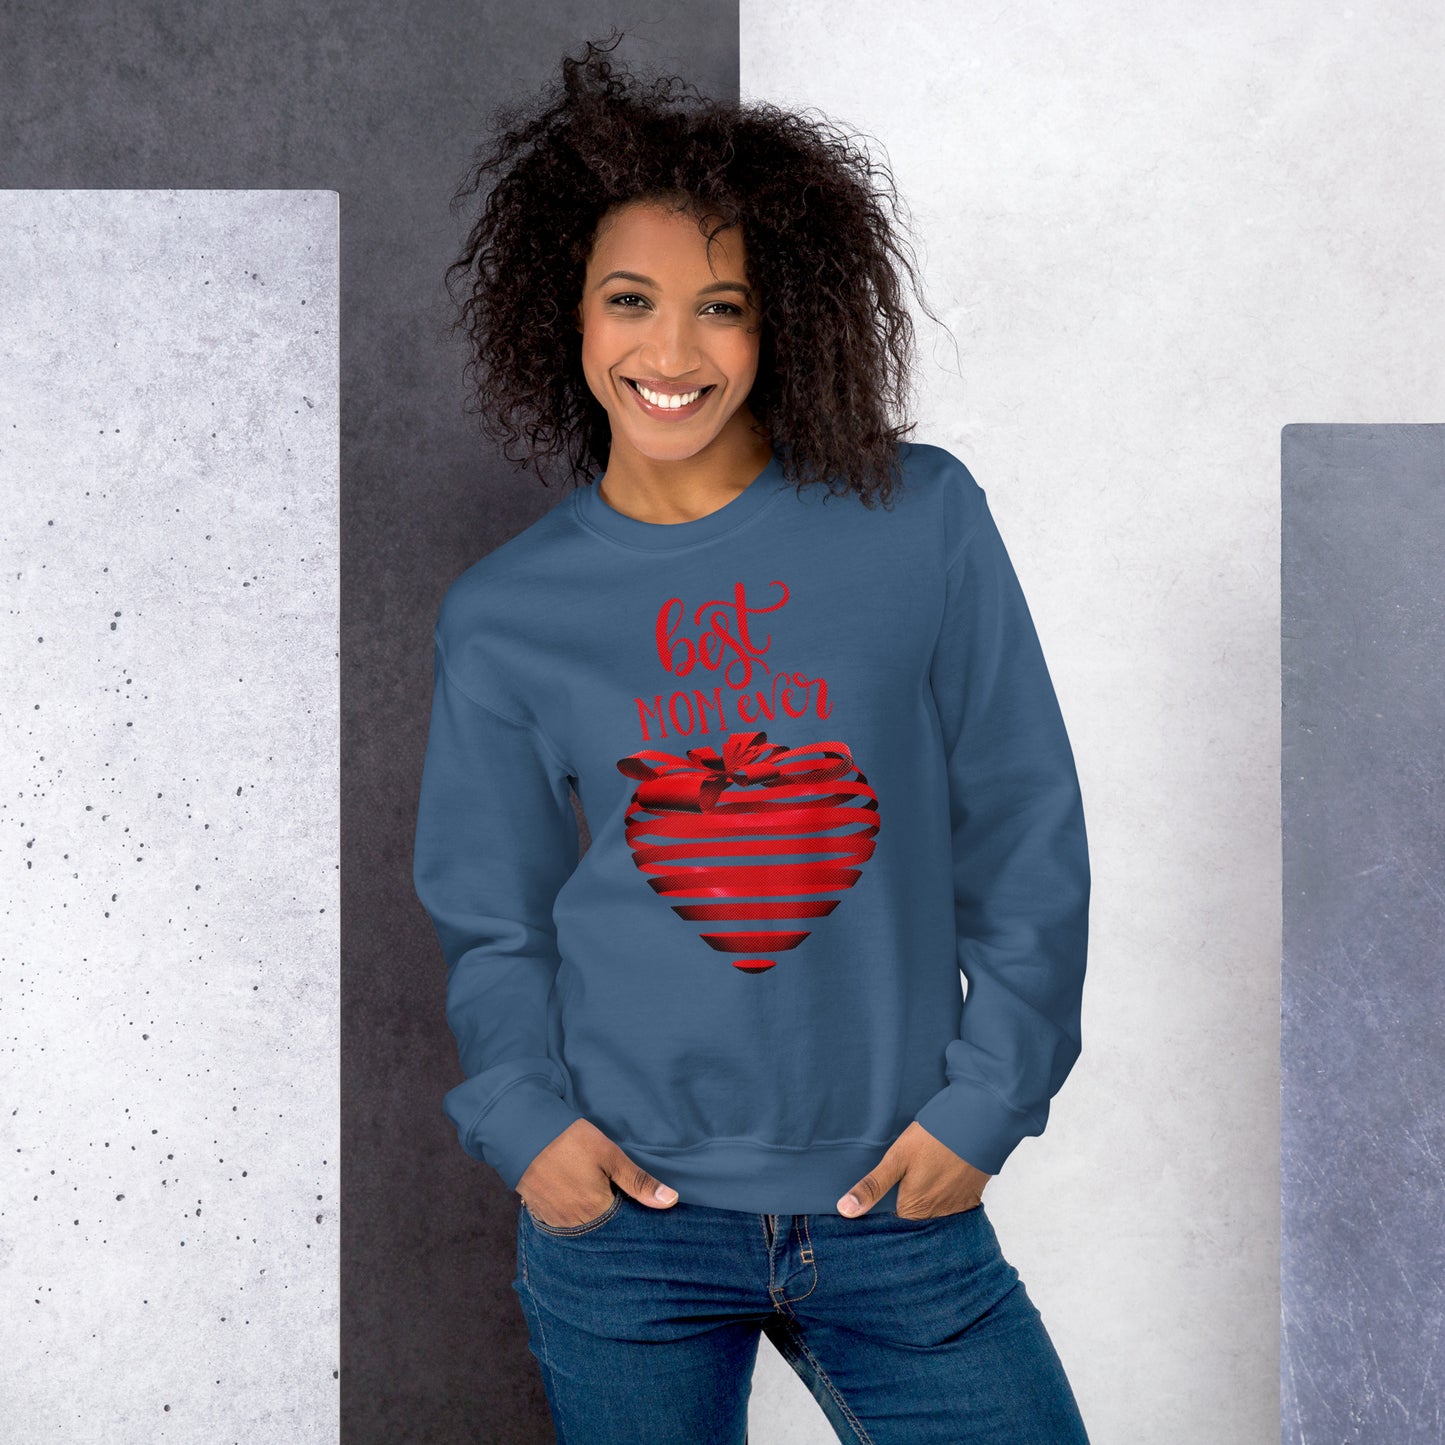 Women with  indigo blue sweater with red text best MOM Ever and red heart